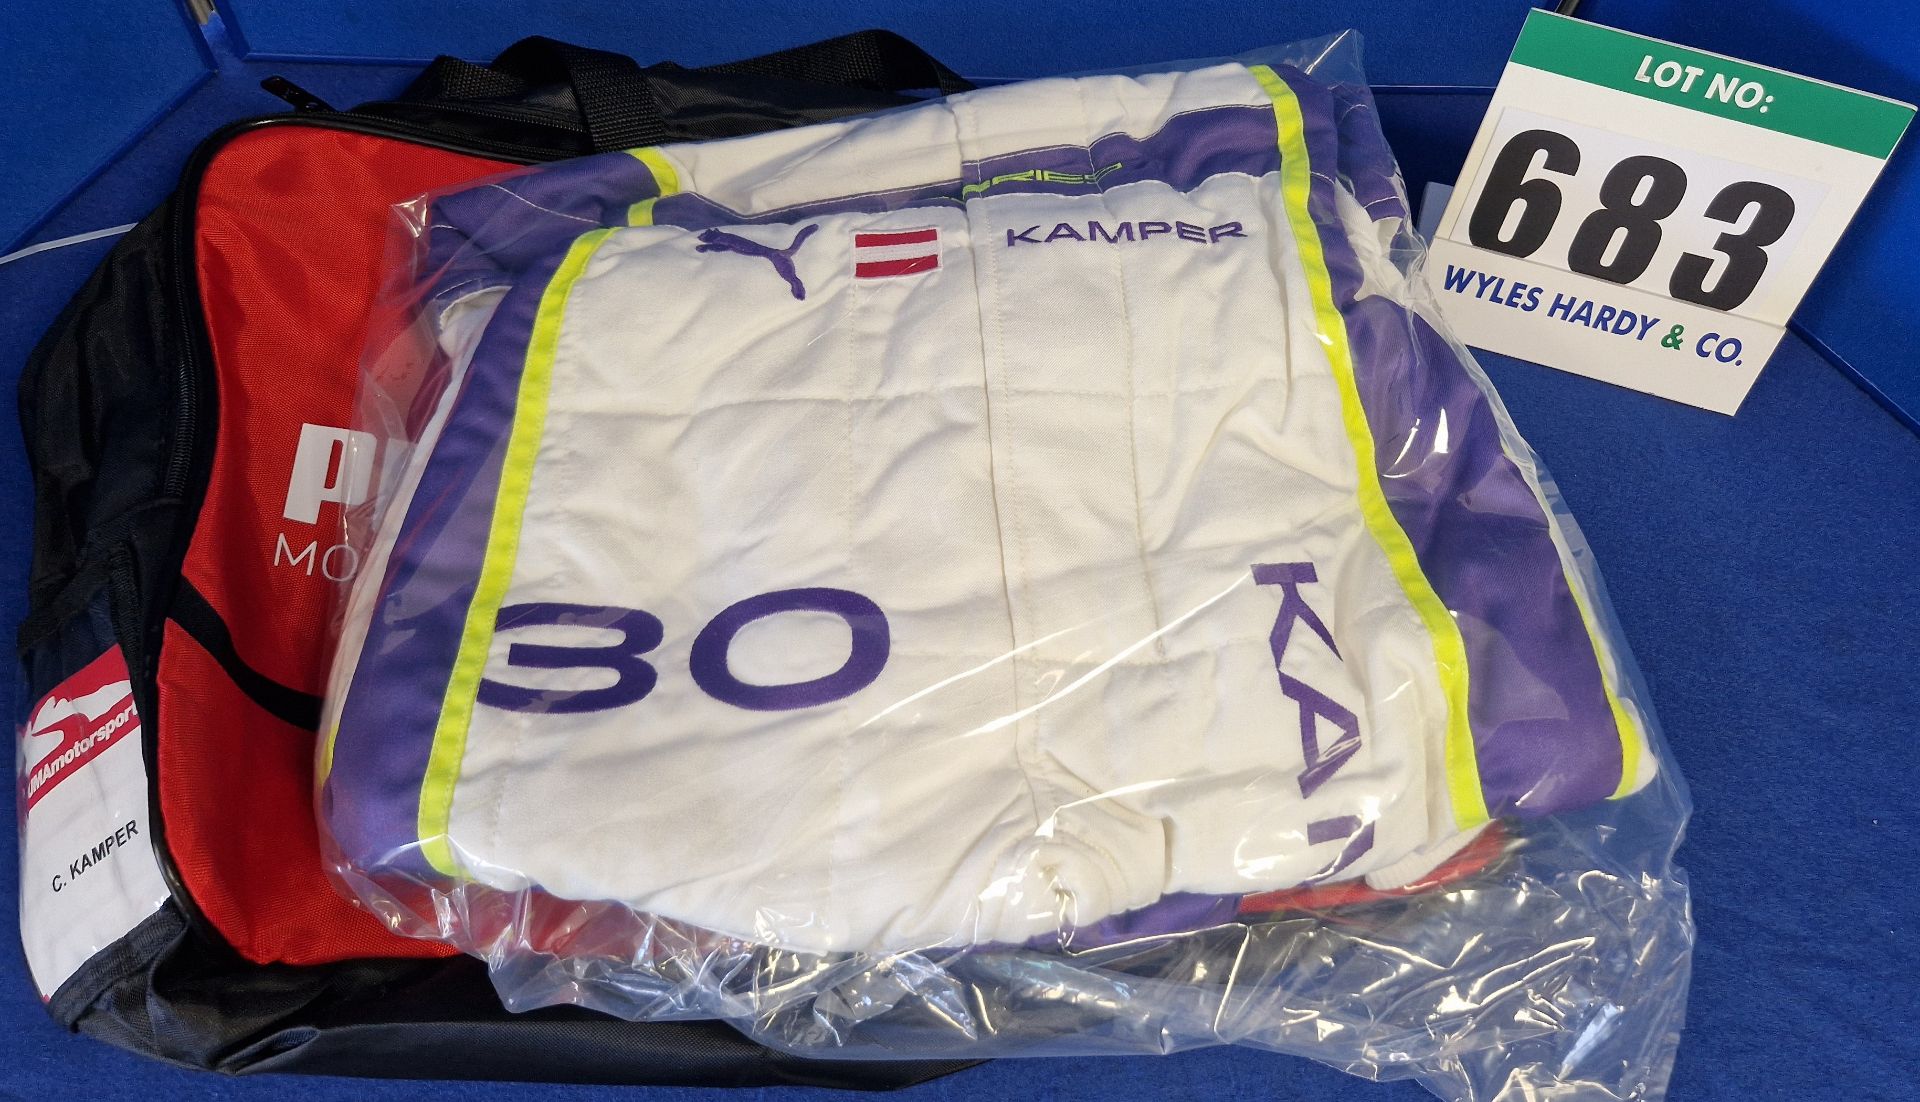 One Unworn PUMA FIA approved Suit (Size - Made to Measure) embroidered with the name C. Kamper in a